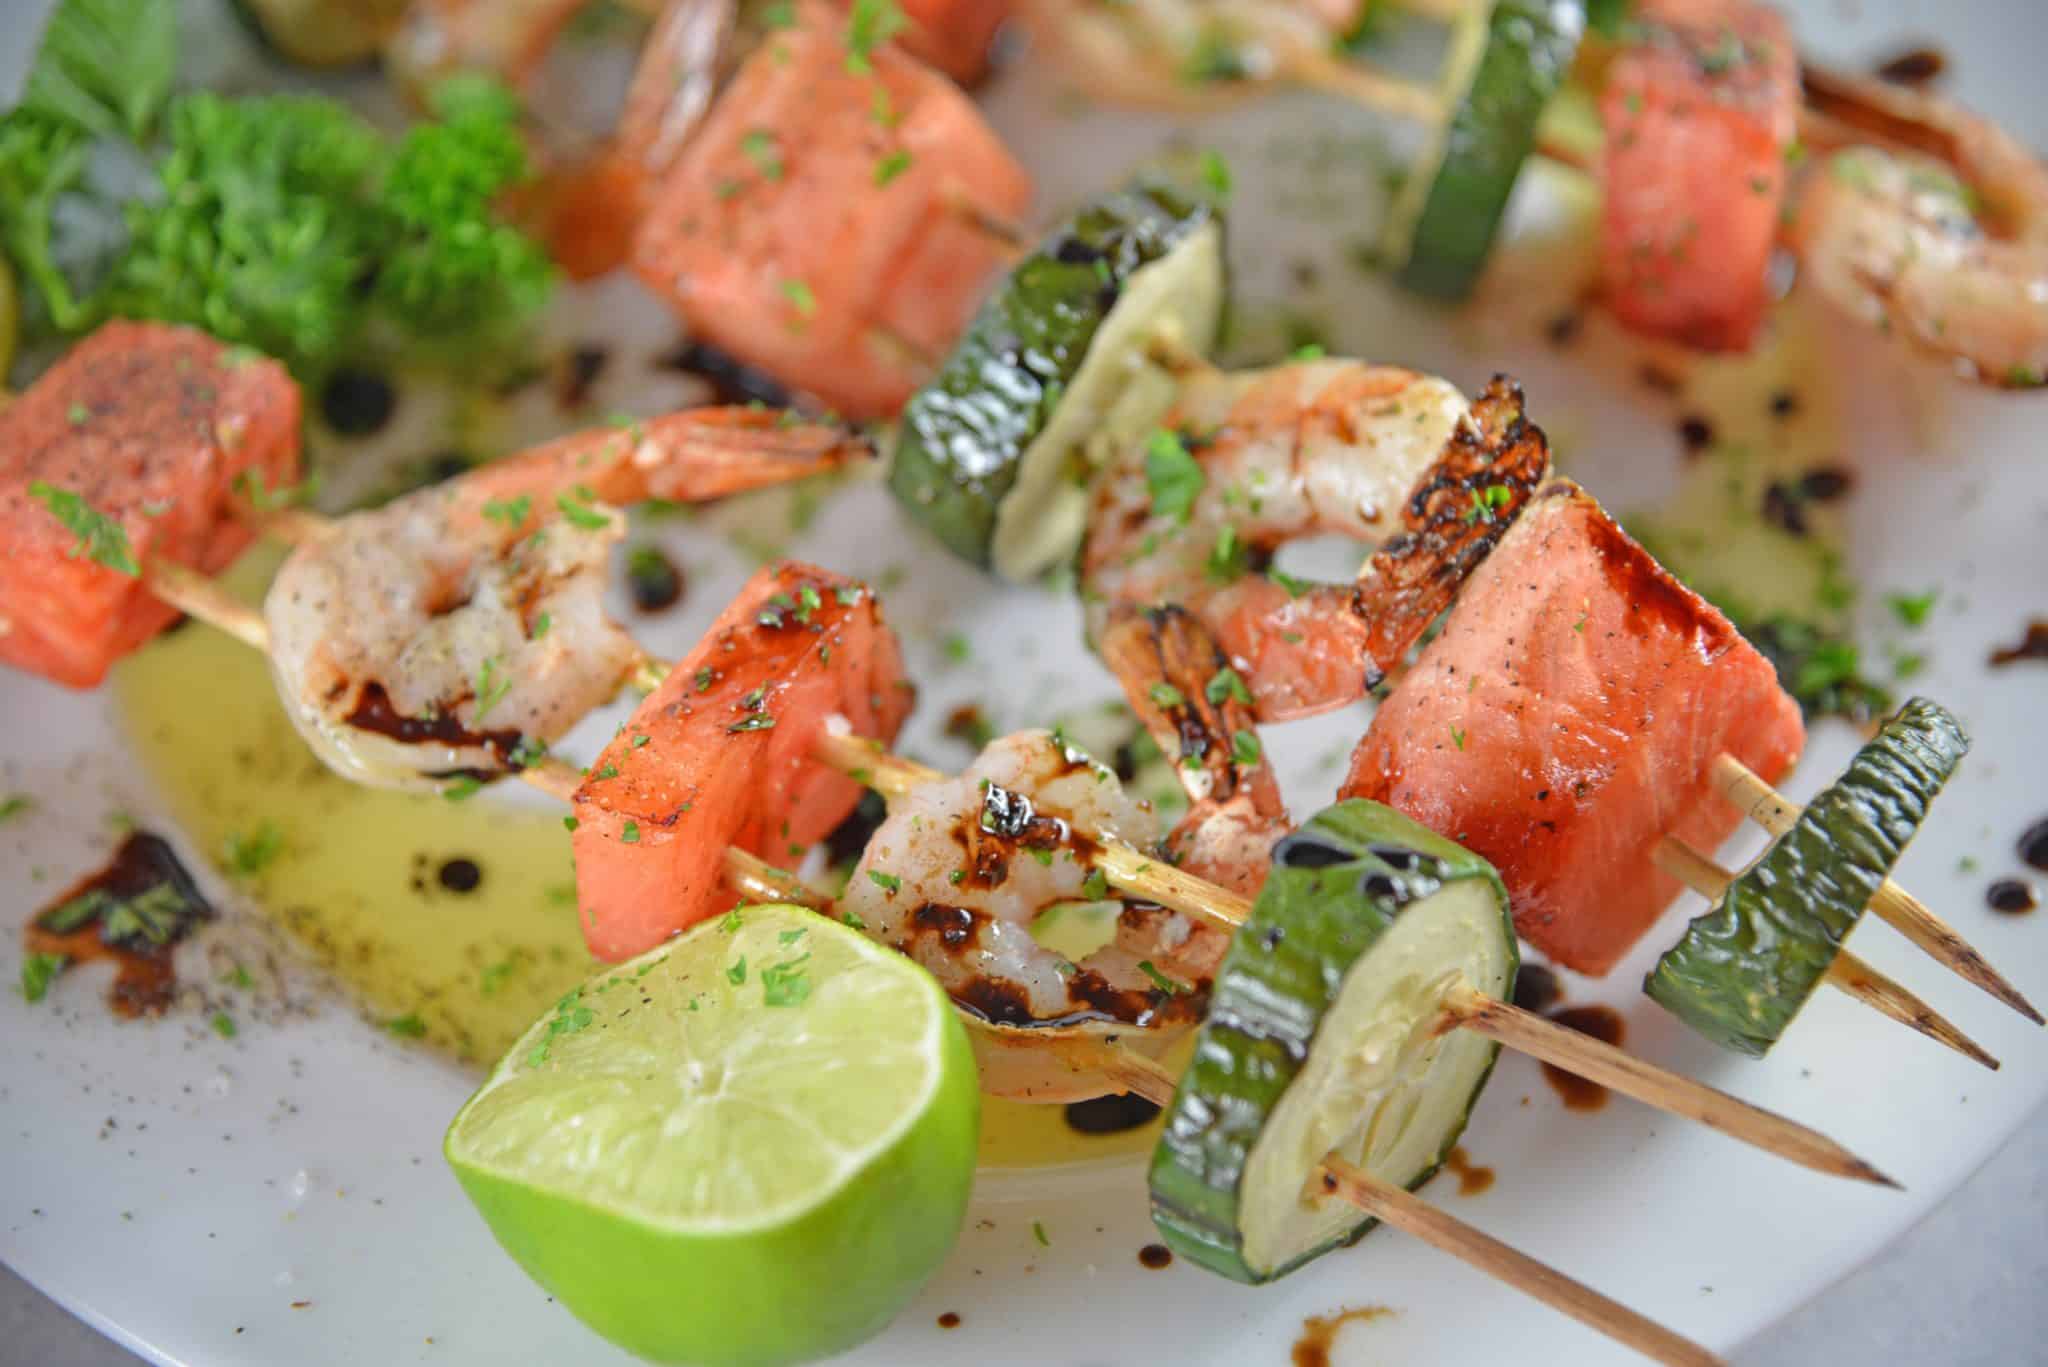 Watermelon Shrimp Kabobs combine grilled shrimp with grilled watermelon with a sweet balsamic reduction and zesty lime. A healthy kabob recipe on the grill.